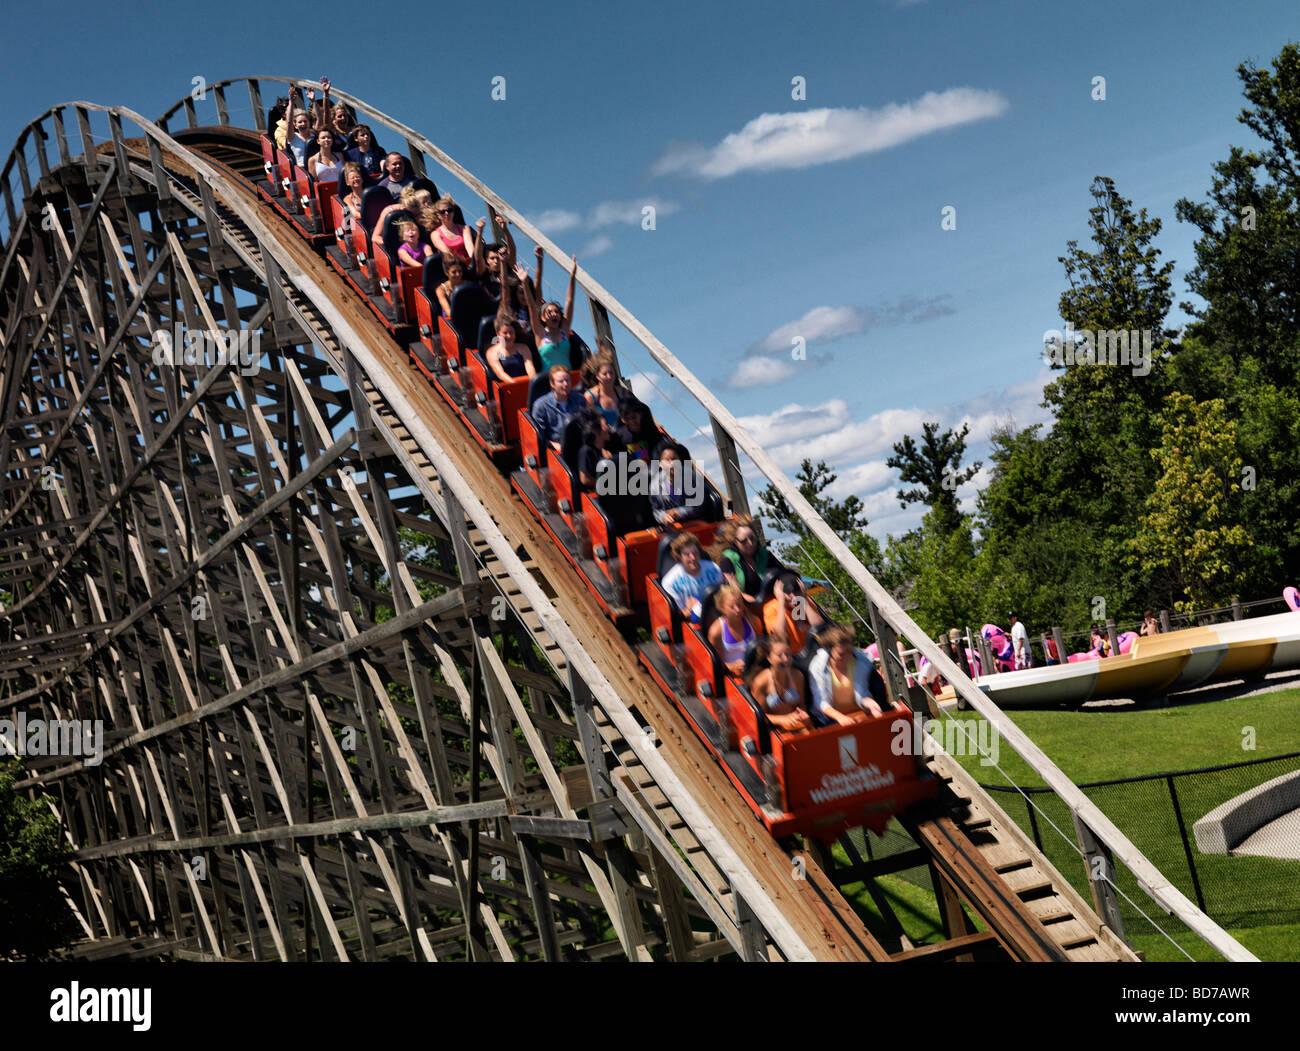 People On Wooden Roller Coaster Mighty Canadian Minebuster At Stock Photo Alamy